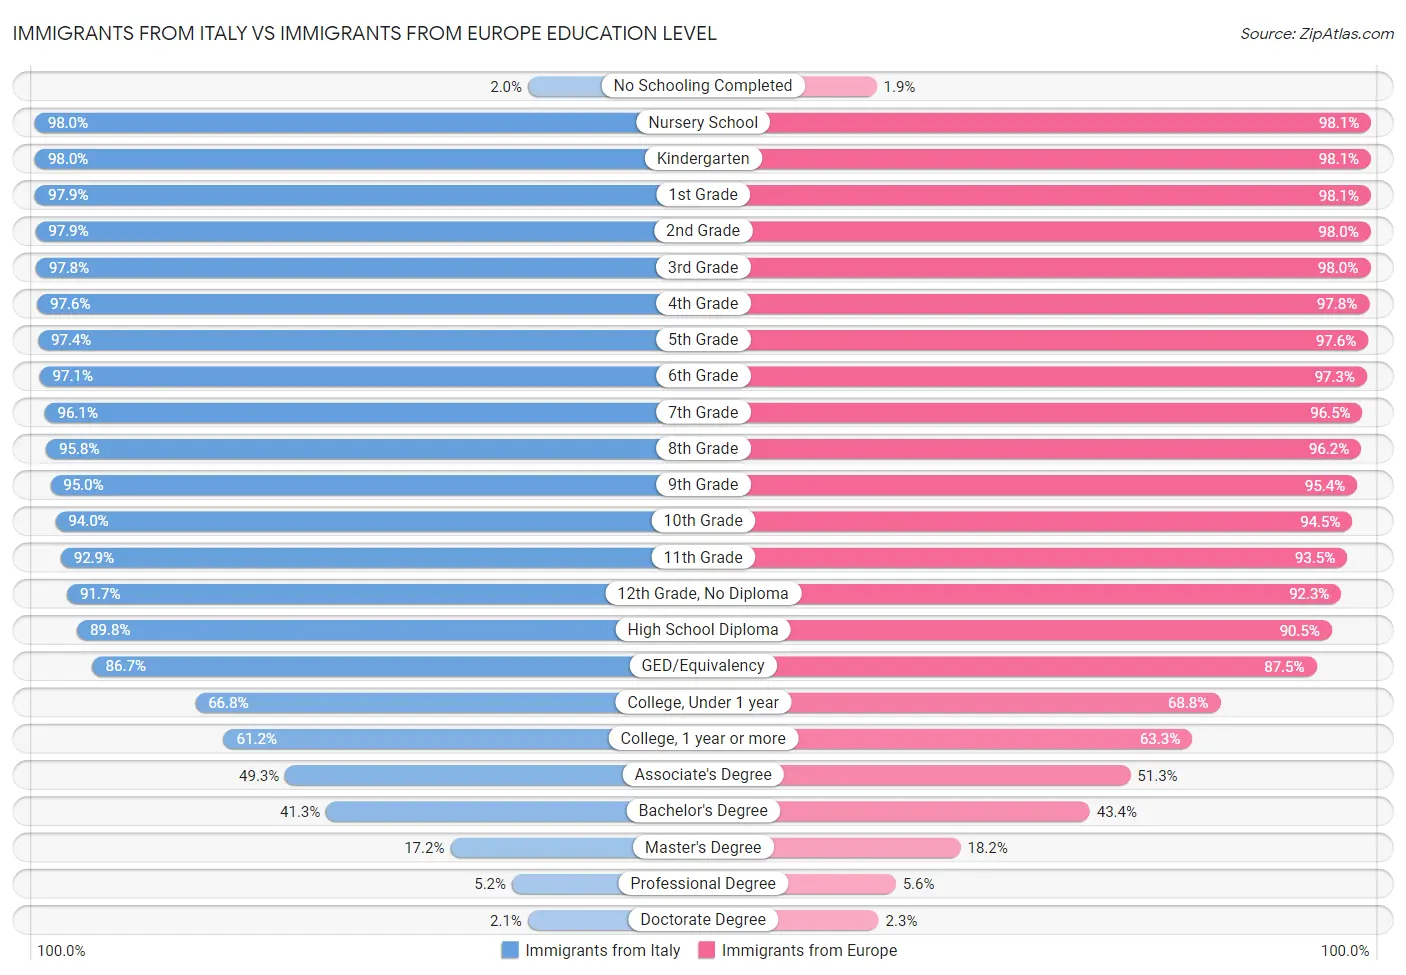 Immigrants from Italy vs Immigrants from Europe Education Level